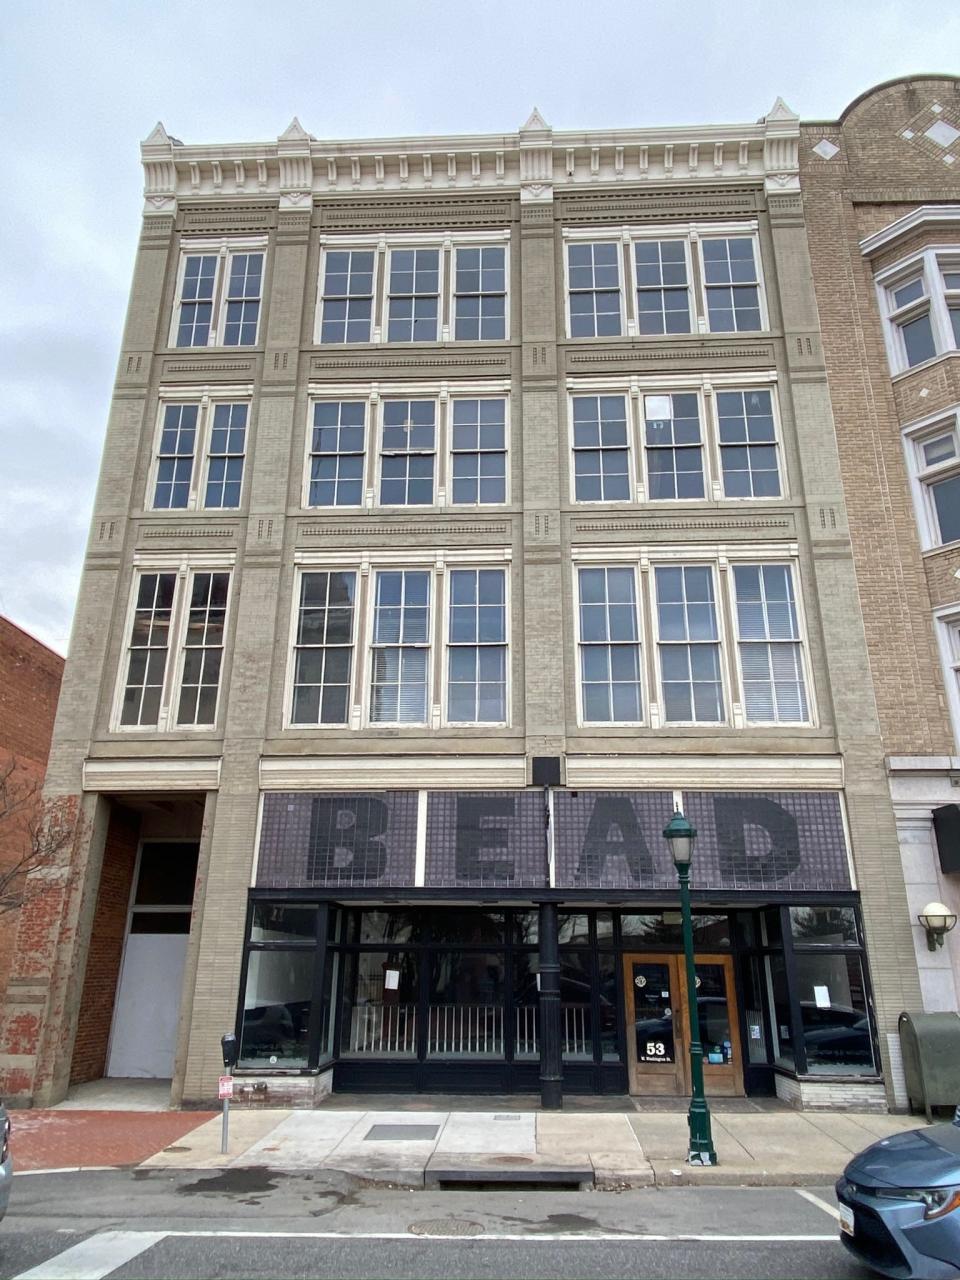 In the late 19th century, the Updegraff family ran a hat and glove factory on the upper levels of the building at 51 W. Washington, and a department store on the ground floor. Current Hagerstown residents might remember it as the former home of Potomac Beads.